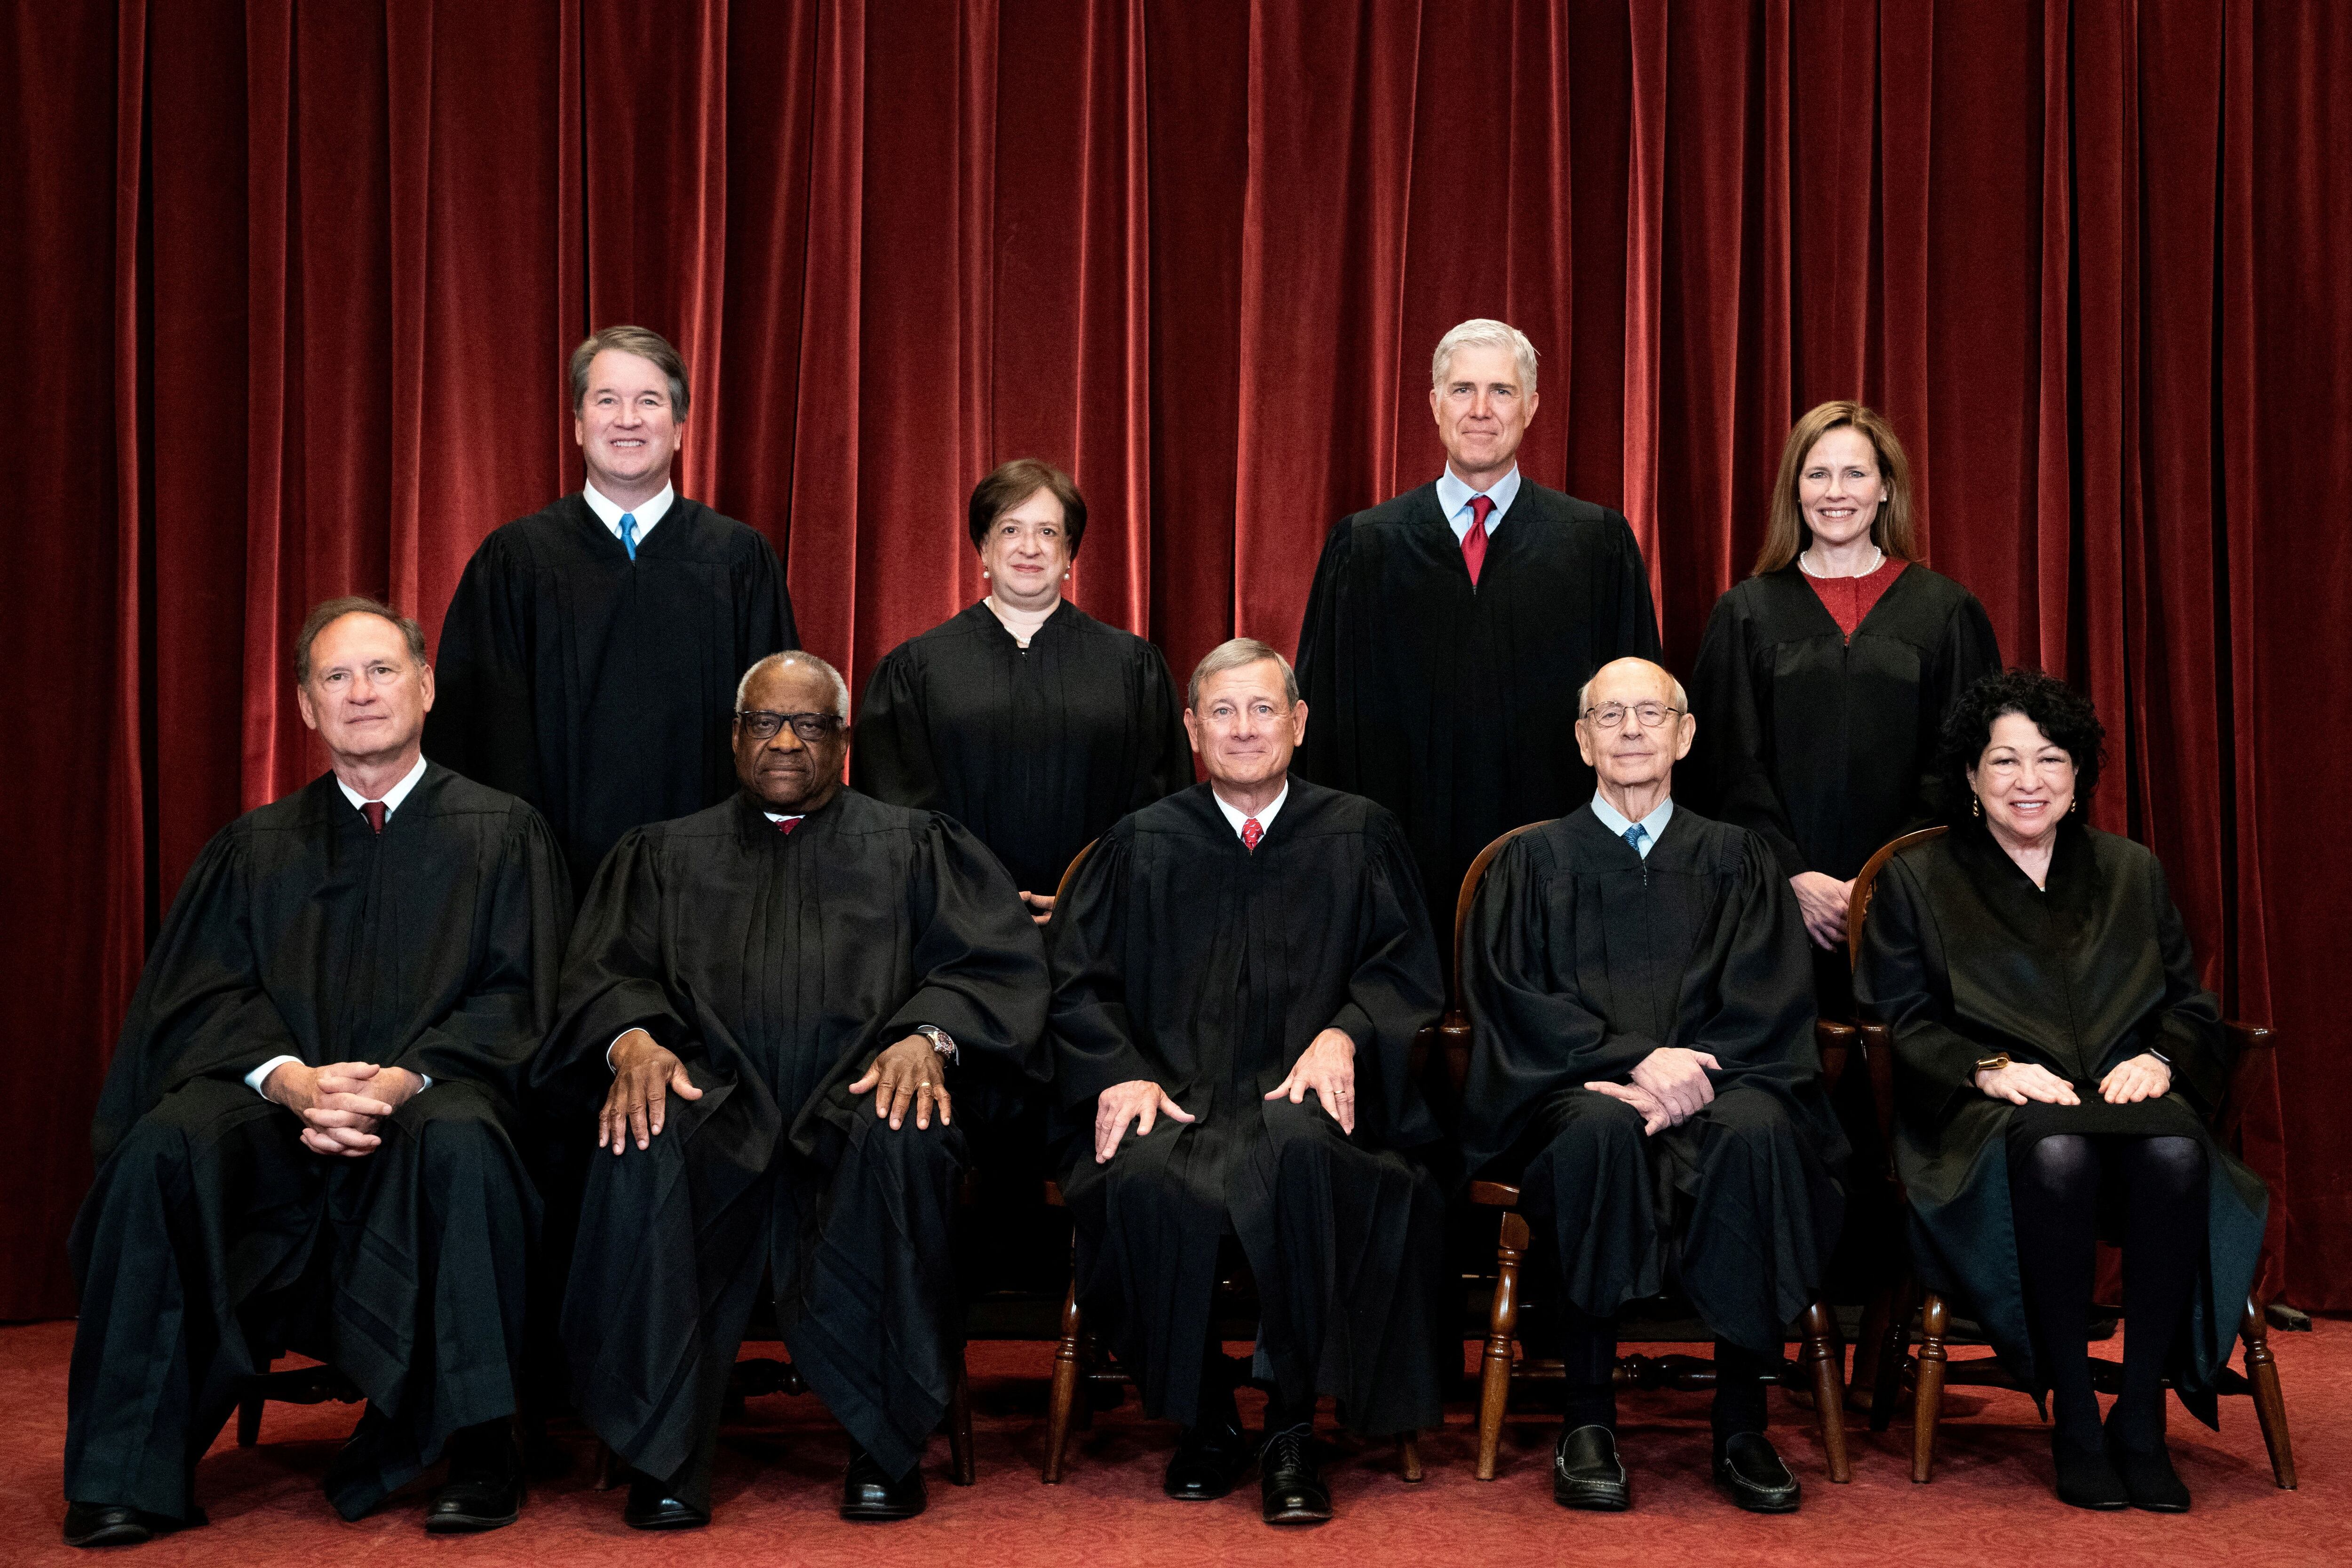 The nine members of the United States Supreme Court: Standing are Brett Kavanaugh, Elena Kagan, Neil Gorsuch and Amy Coney Barrett.  Seated are Samuel Alito, Clarence Thomas, John Roberts, Stephen Breyer and Sonia Sotomayor.  REUTERS/File Photo